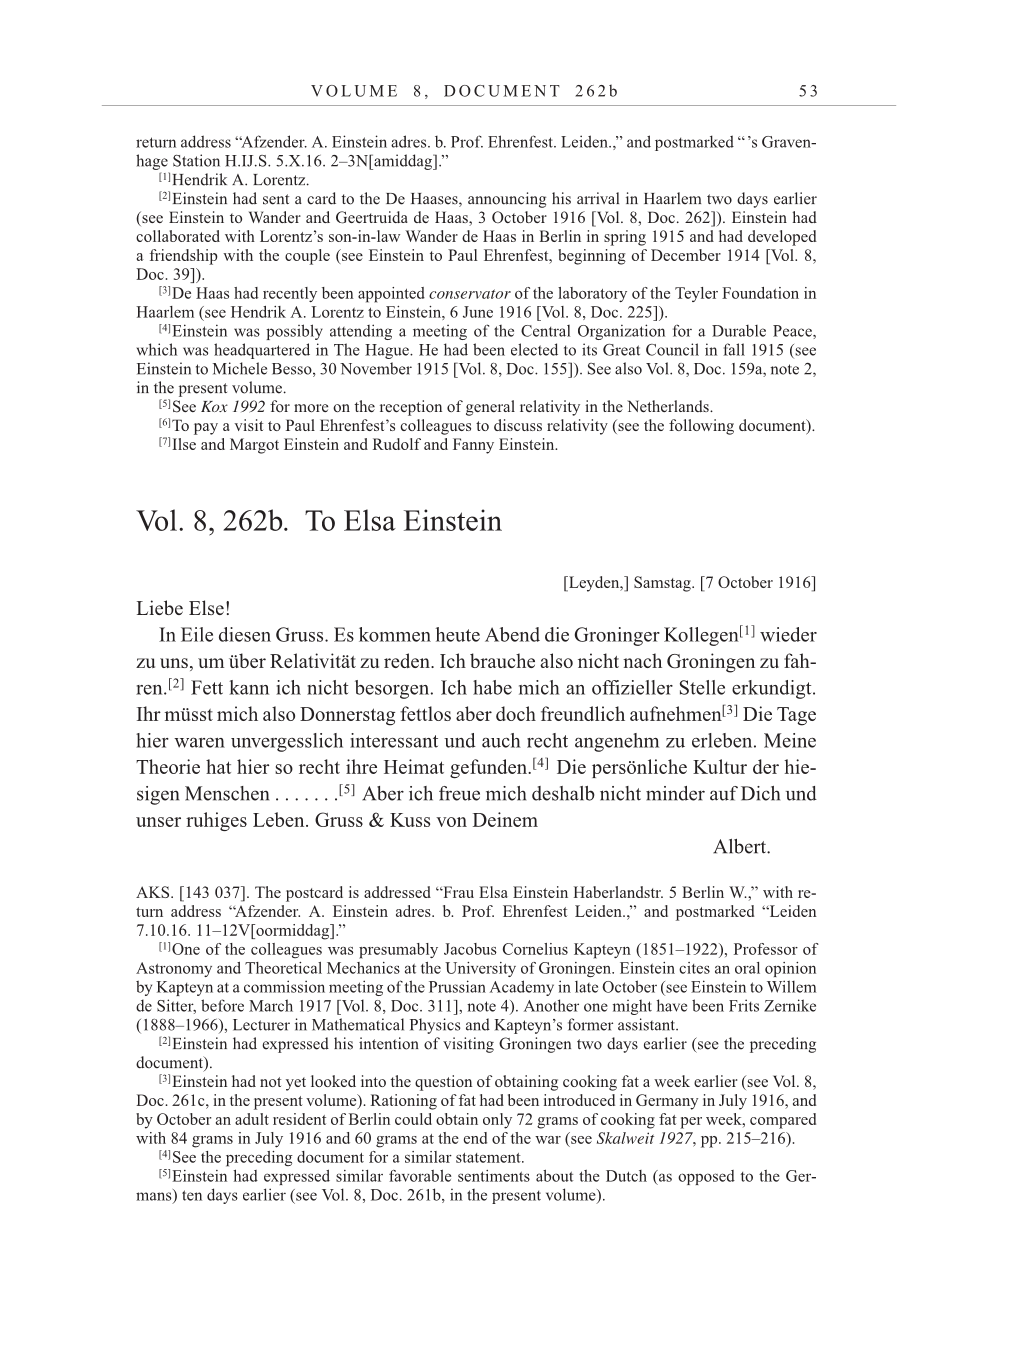 Volume 10: The Berlin Years: Correspondence May-December 1920 / Supplementary Correspondence 1909-1920 page 53